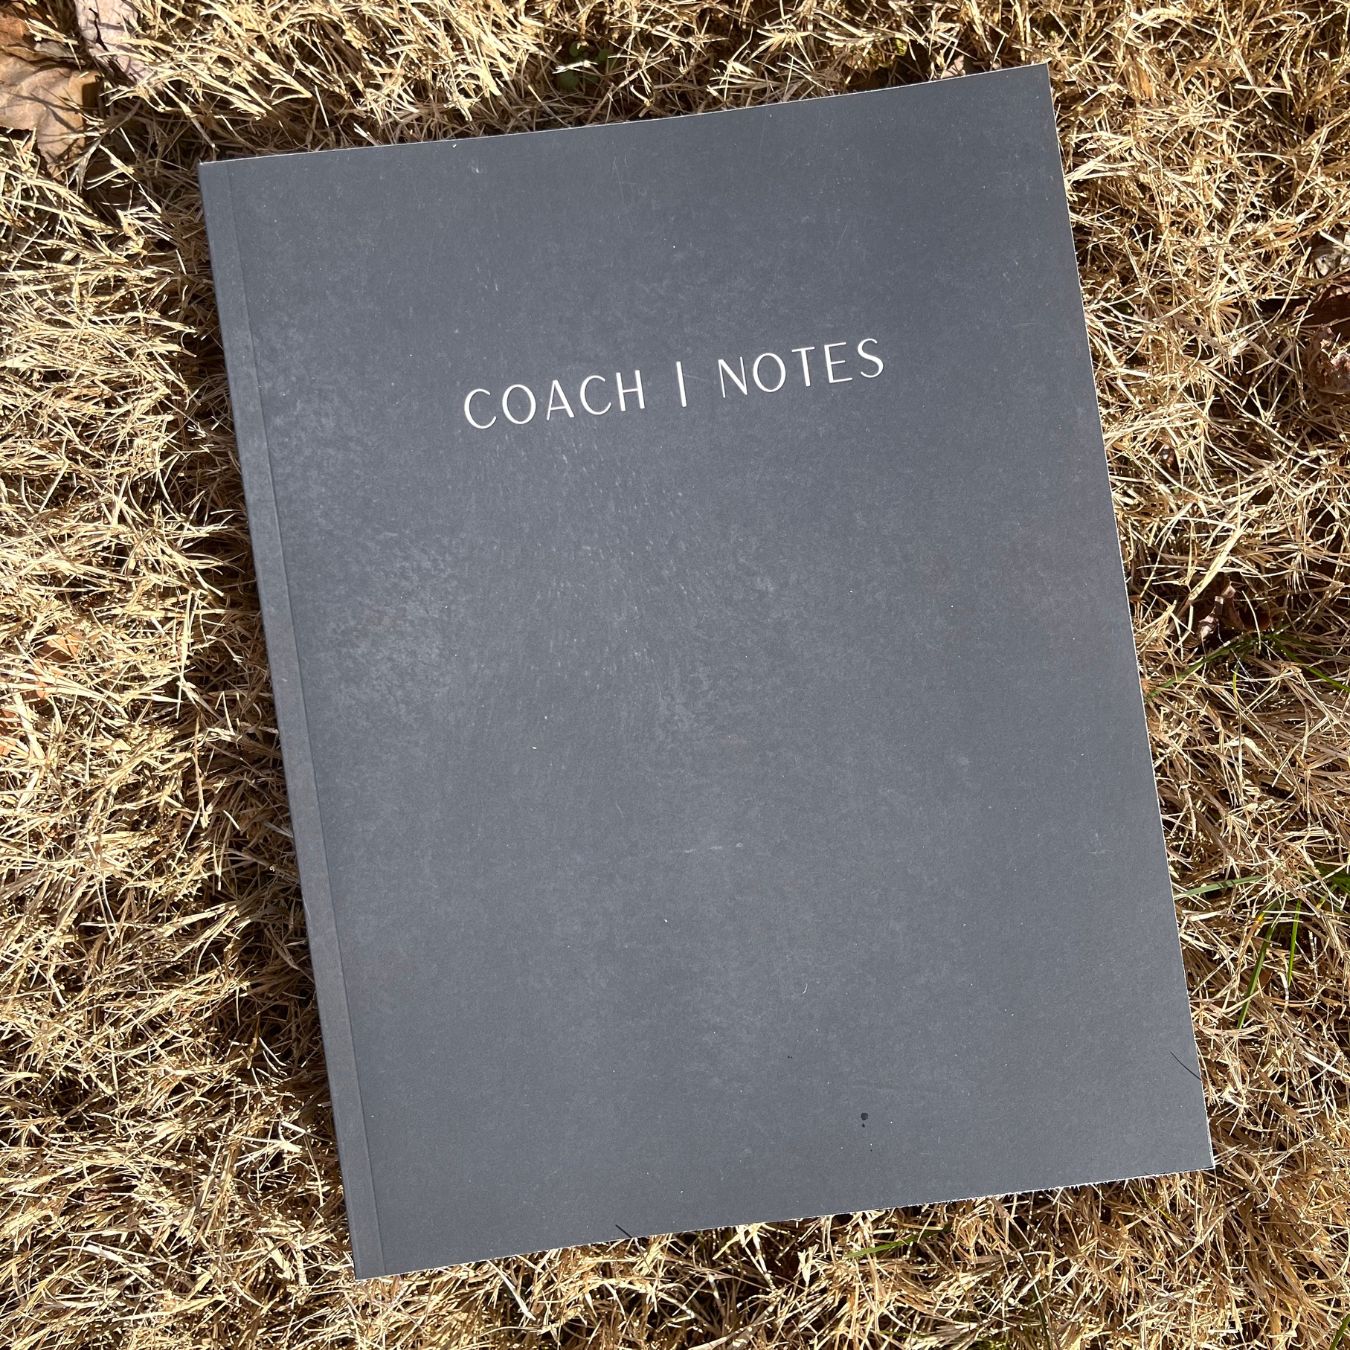 Play Designing Notebook for Football Coach: 100 Page Playbook with Football Diagrams and Note-Taking Sections